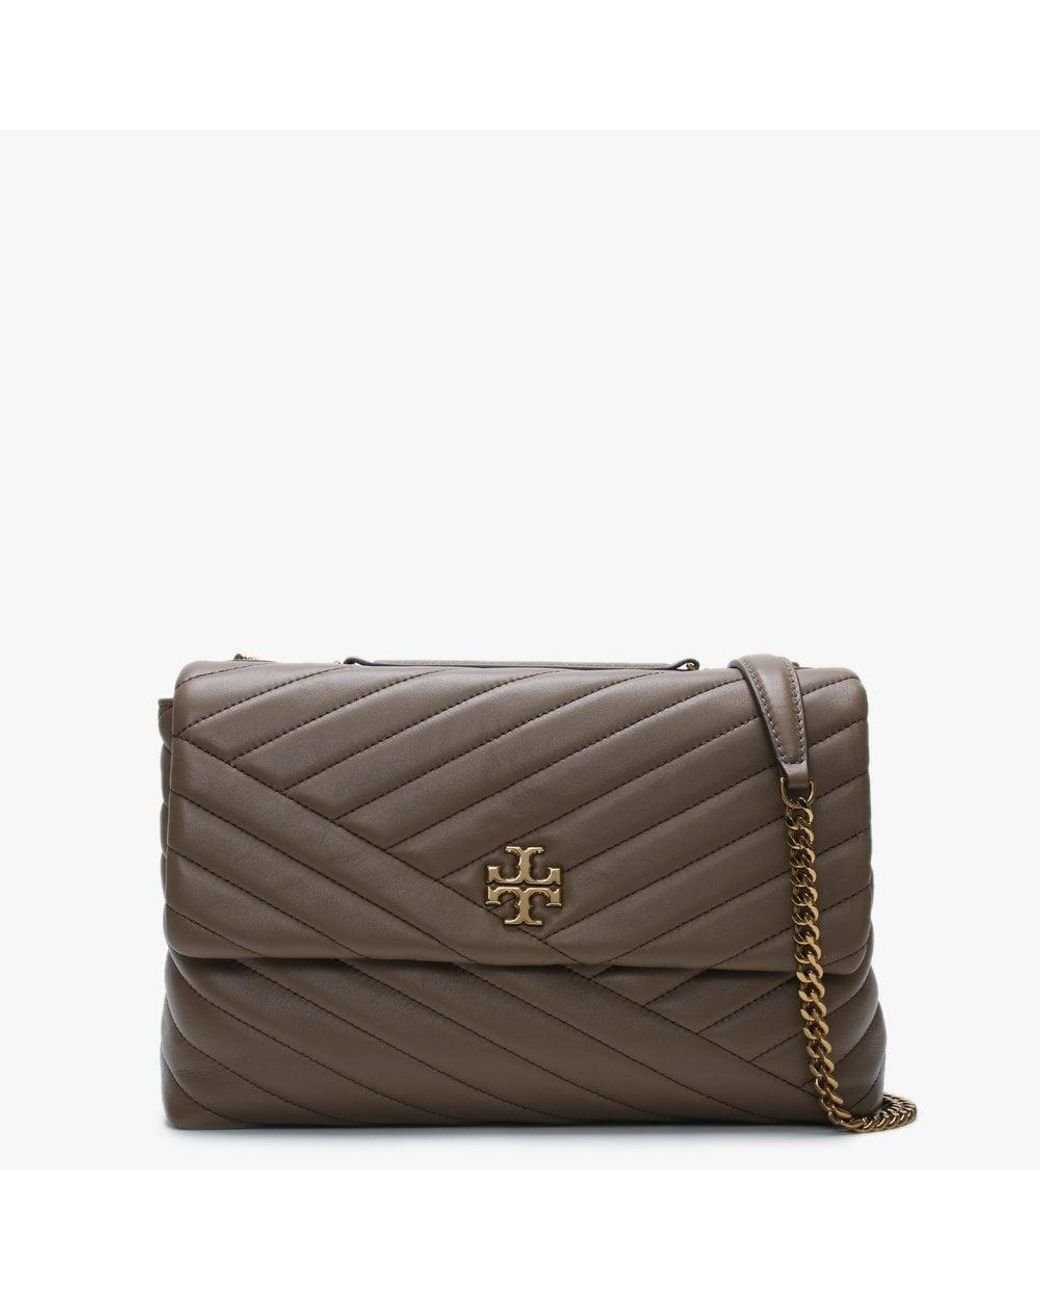 Tory Burch Kira Chevron Classic Taupe Leather Shoulder Bag in 